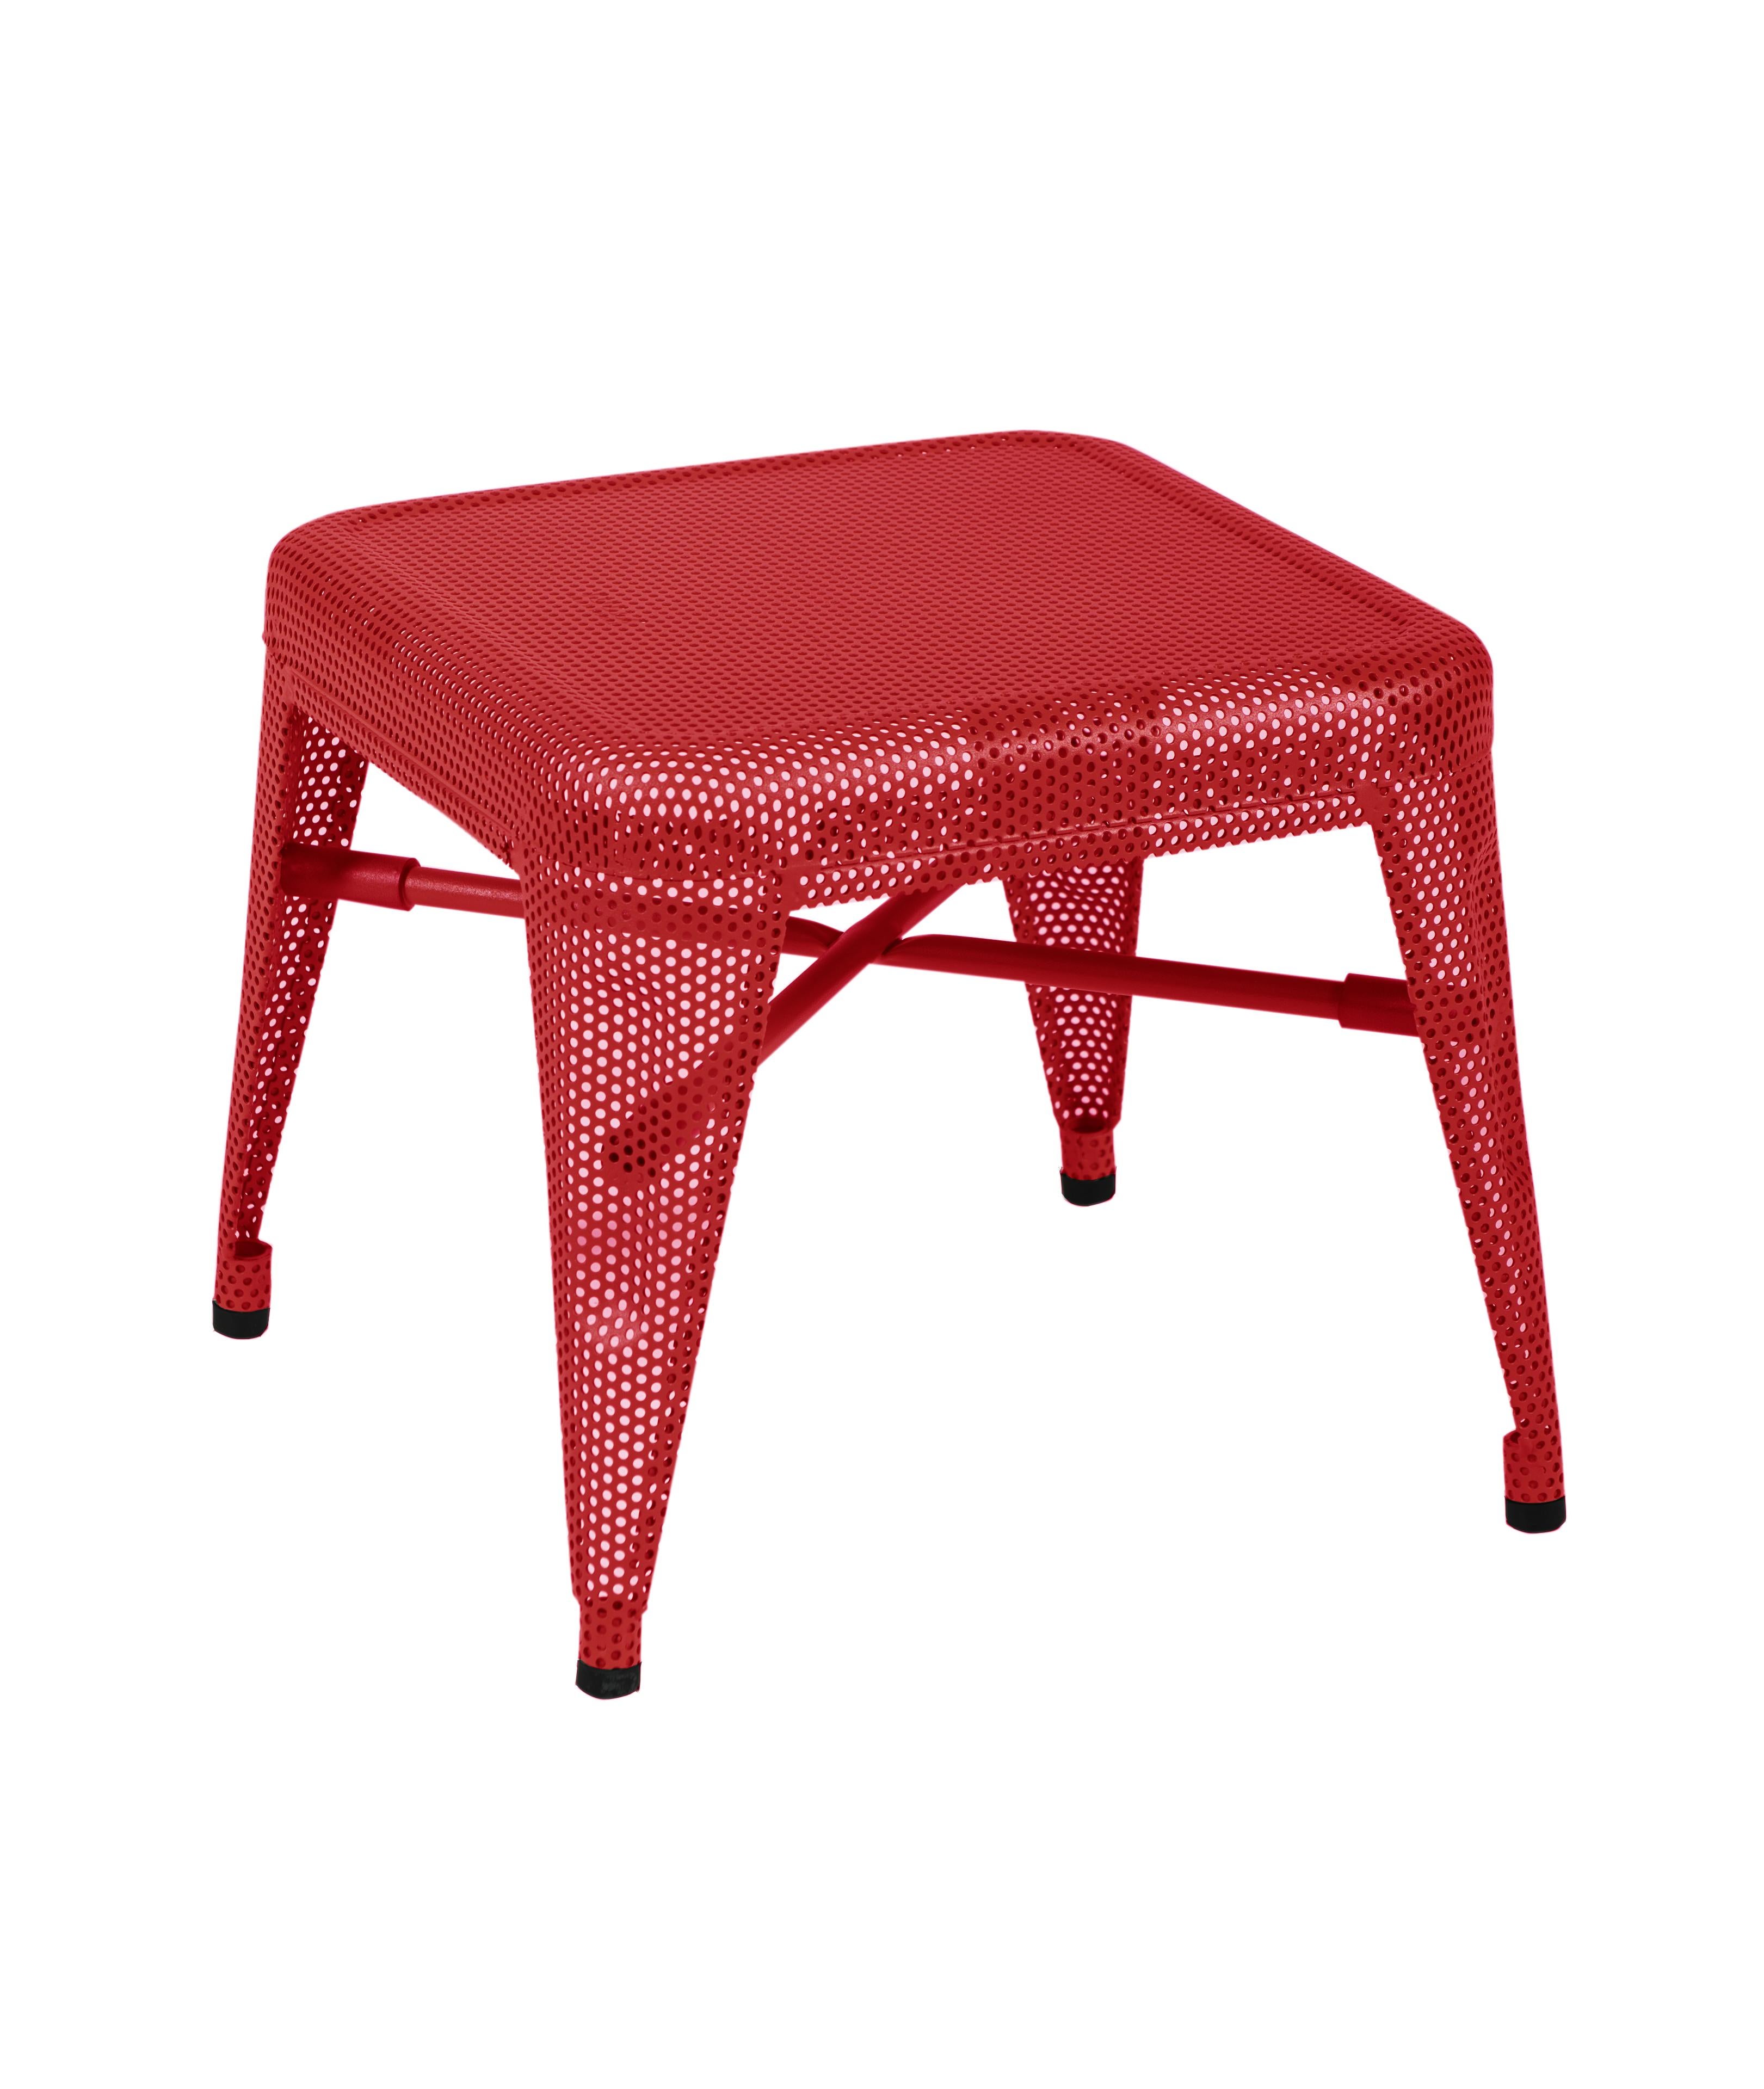 For Sale: Red (Piment) H30 Indoor Perforated Steel Stool in Essential Colors by Tolix